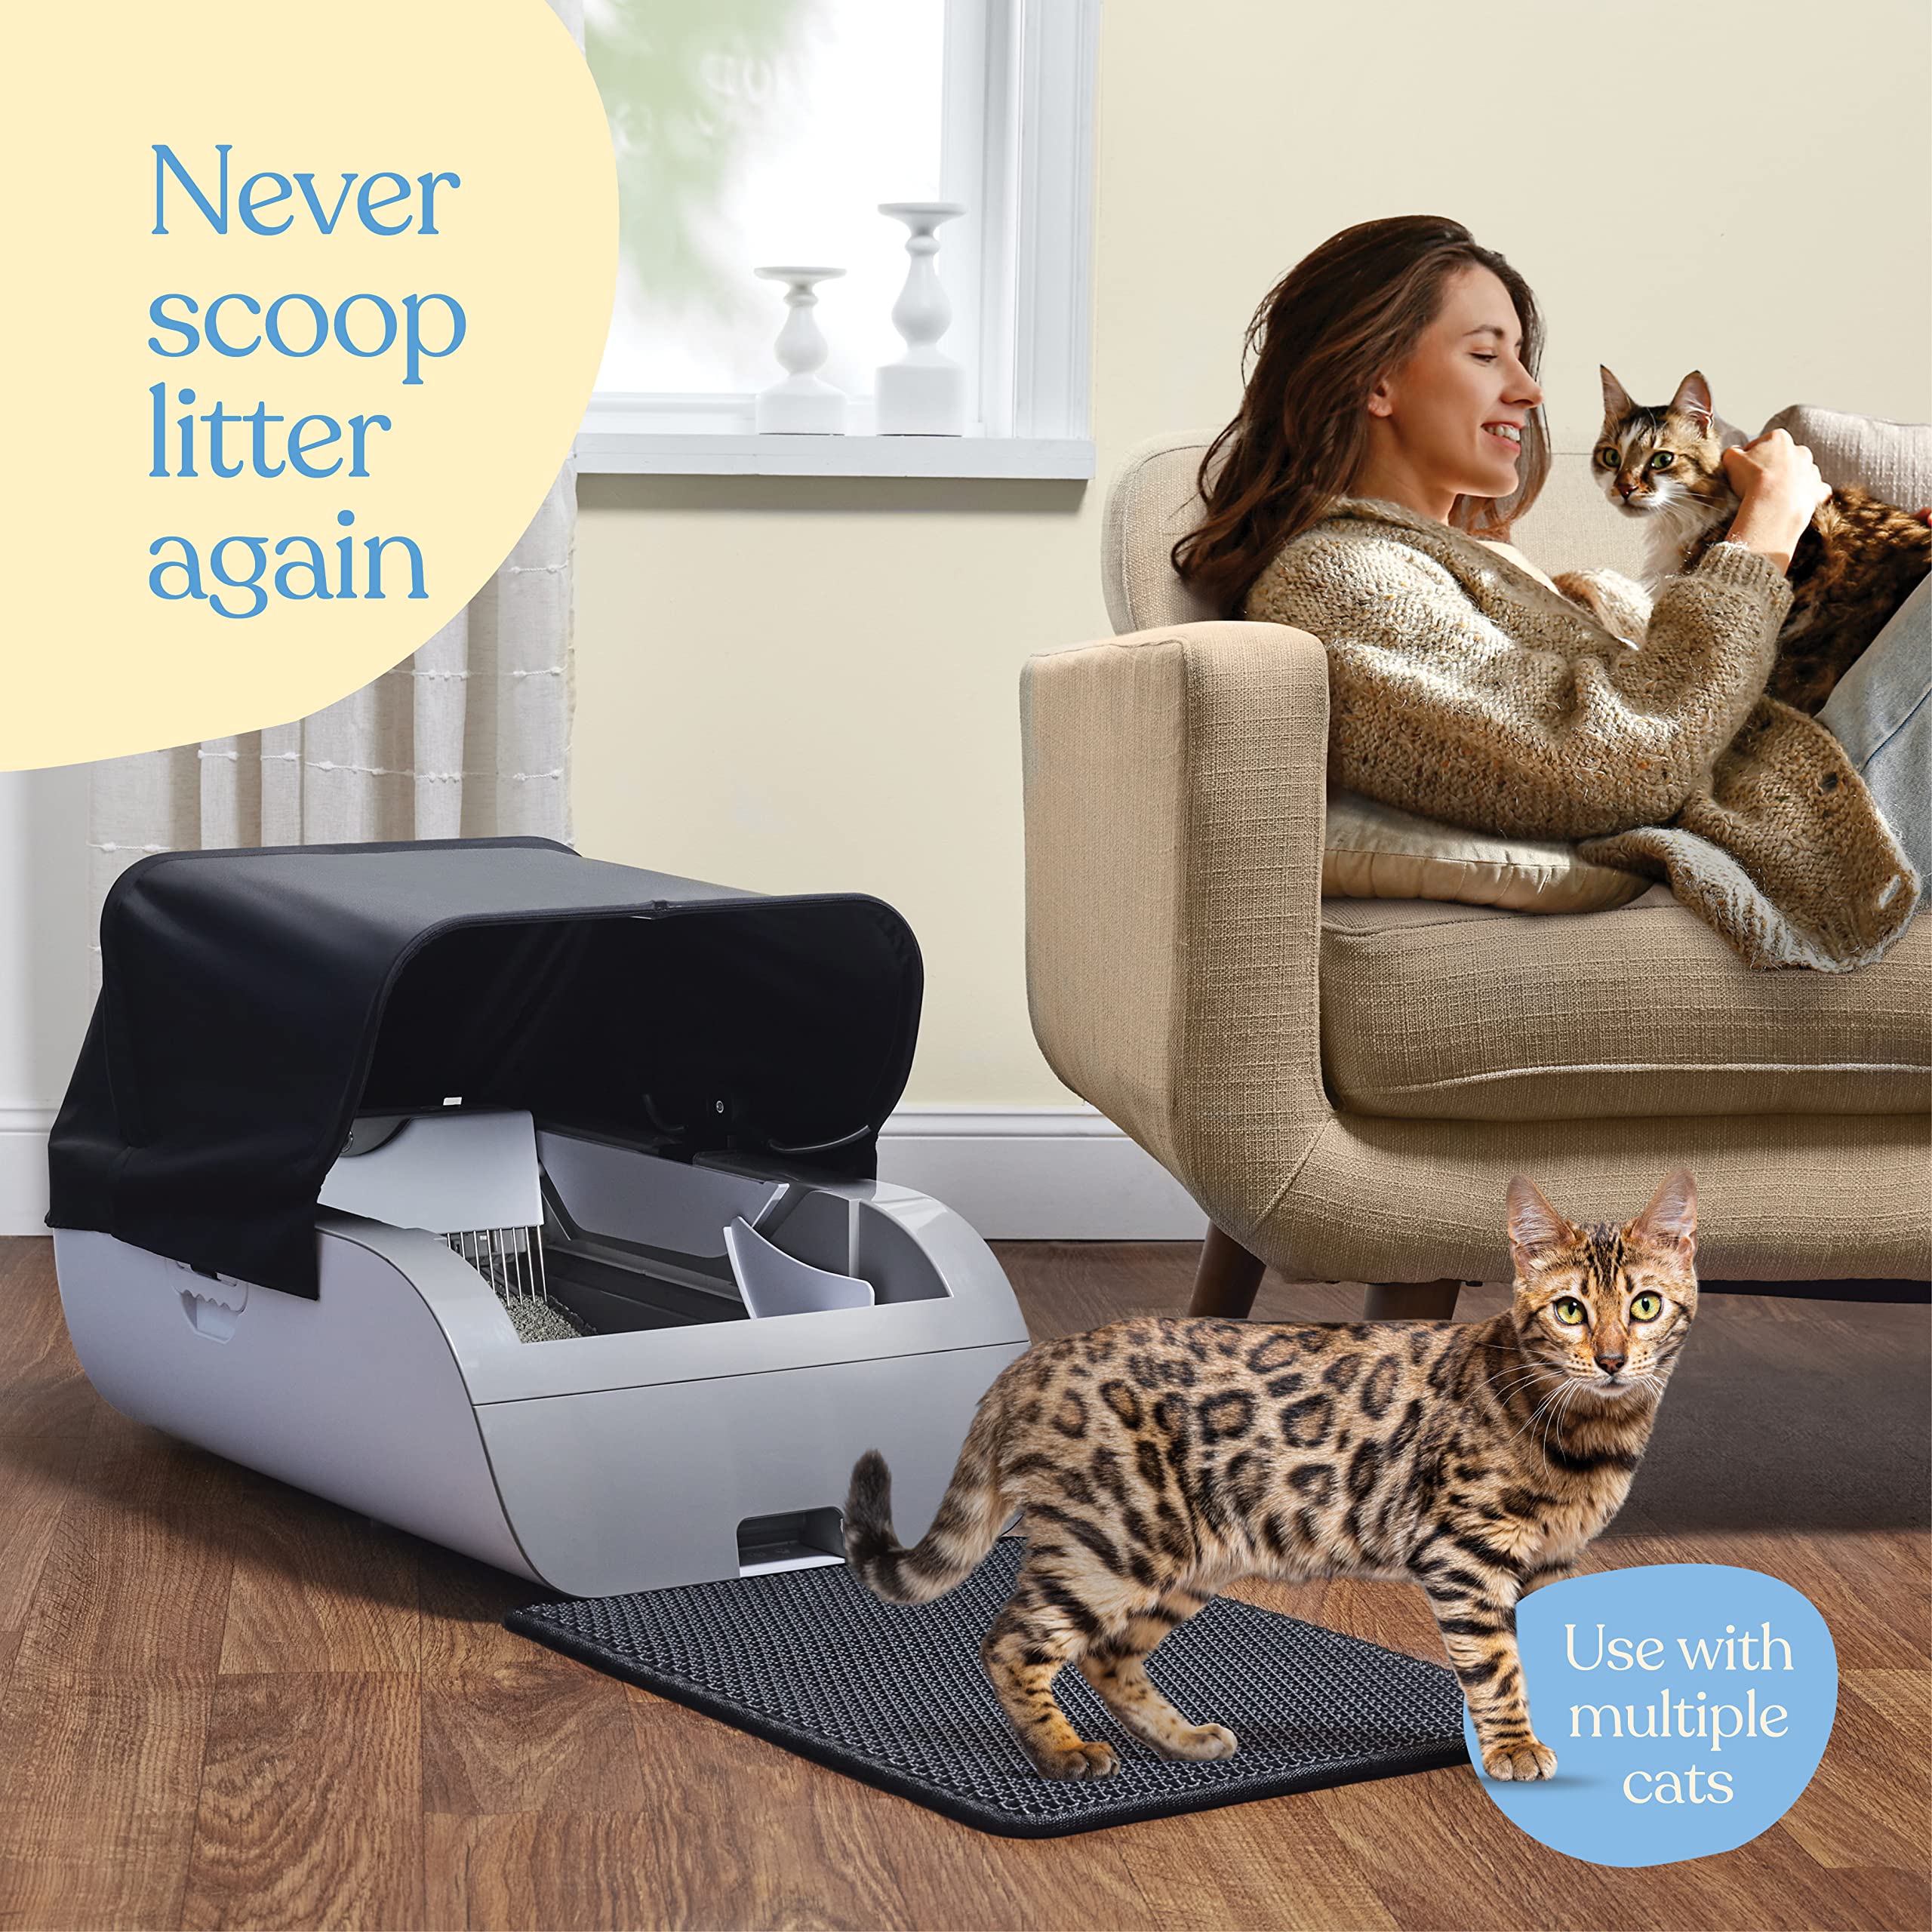 Smart Automatic Cat Litter Box - Self Cleaning Cat Litter Box with Built in Odor Eliminator -Works with Clumping Cat Litter (No Expensive Refills) Large Cat Litter Box with Hood & Litter Mat.  - Like New